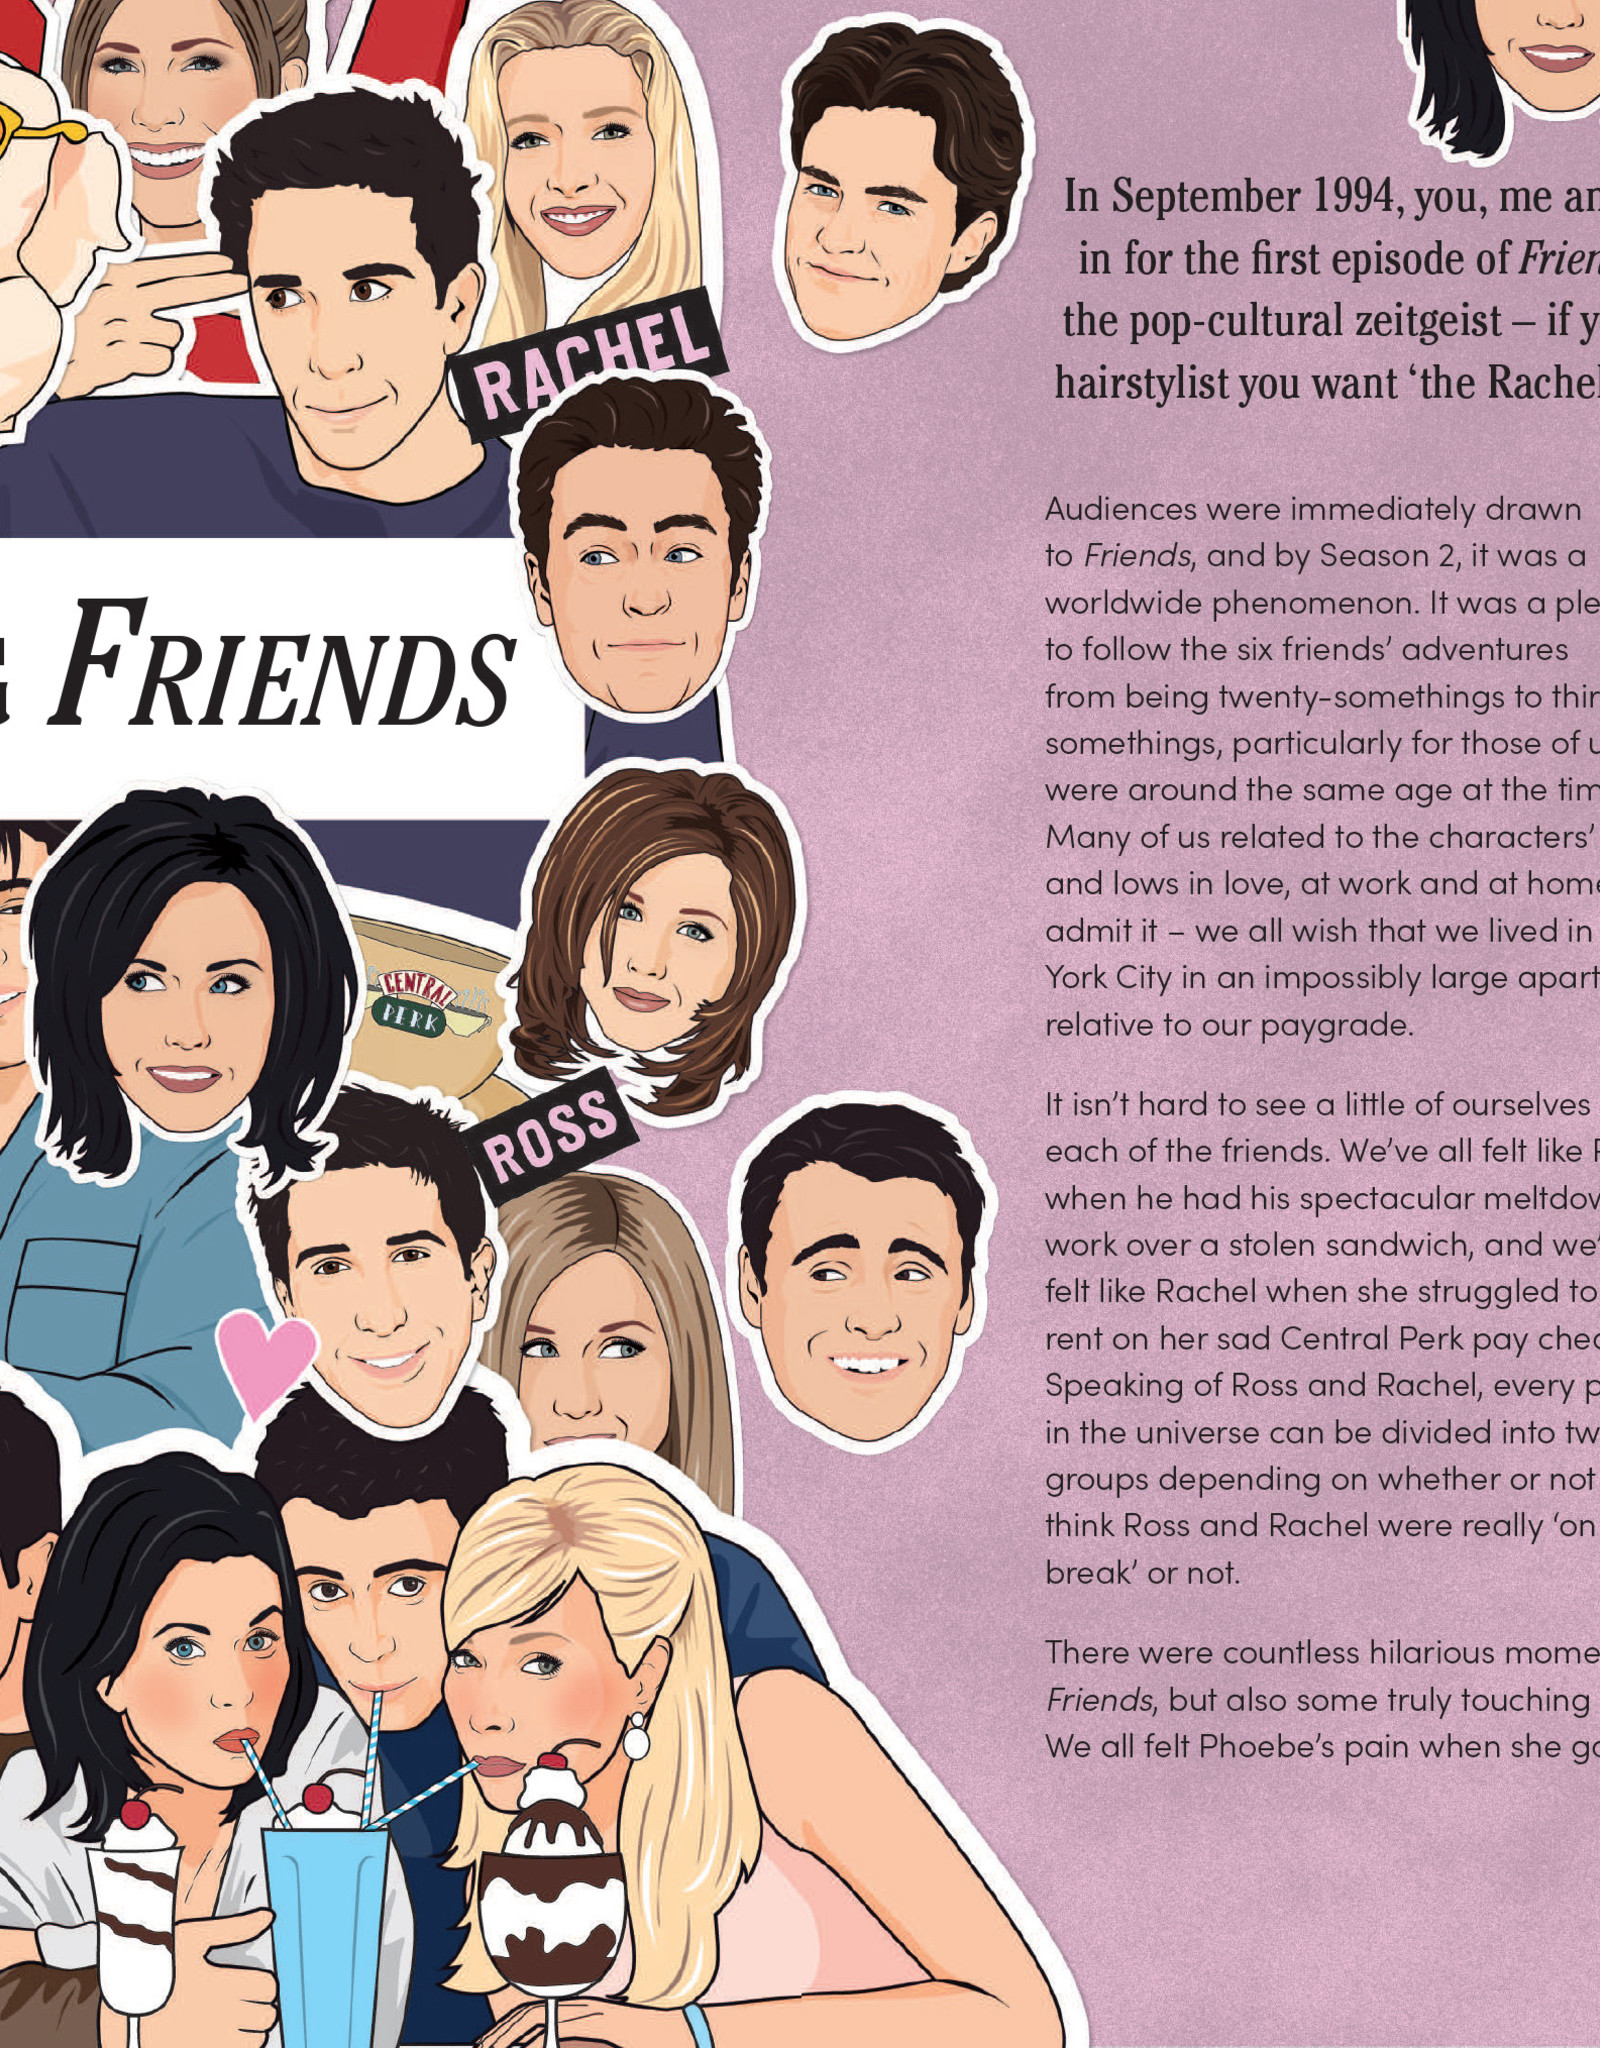 ILL BE THERE FOR YOU (FRIENDS UNOFFICIAL FAN GUIDE)